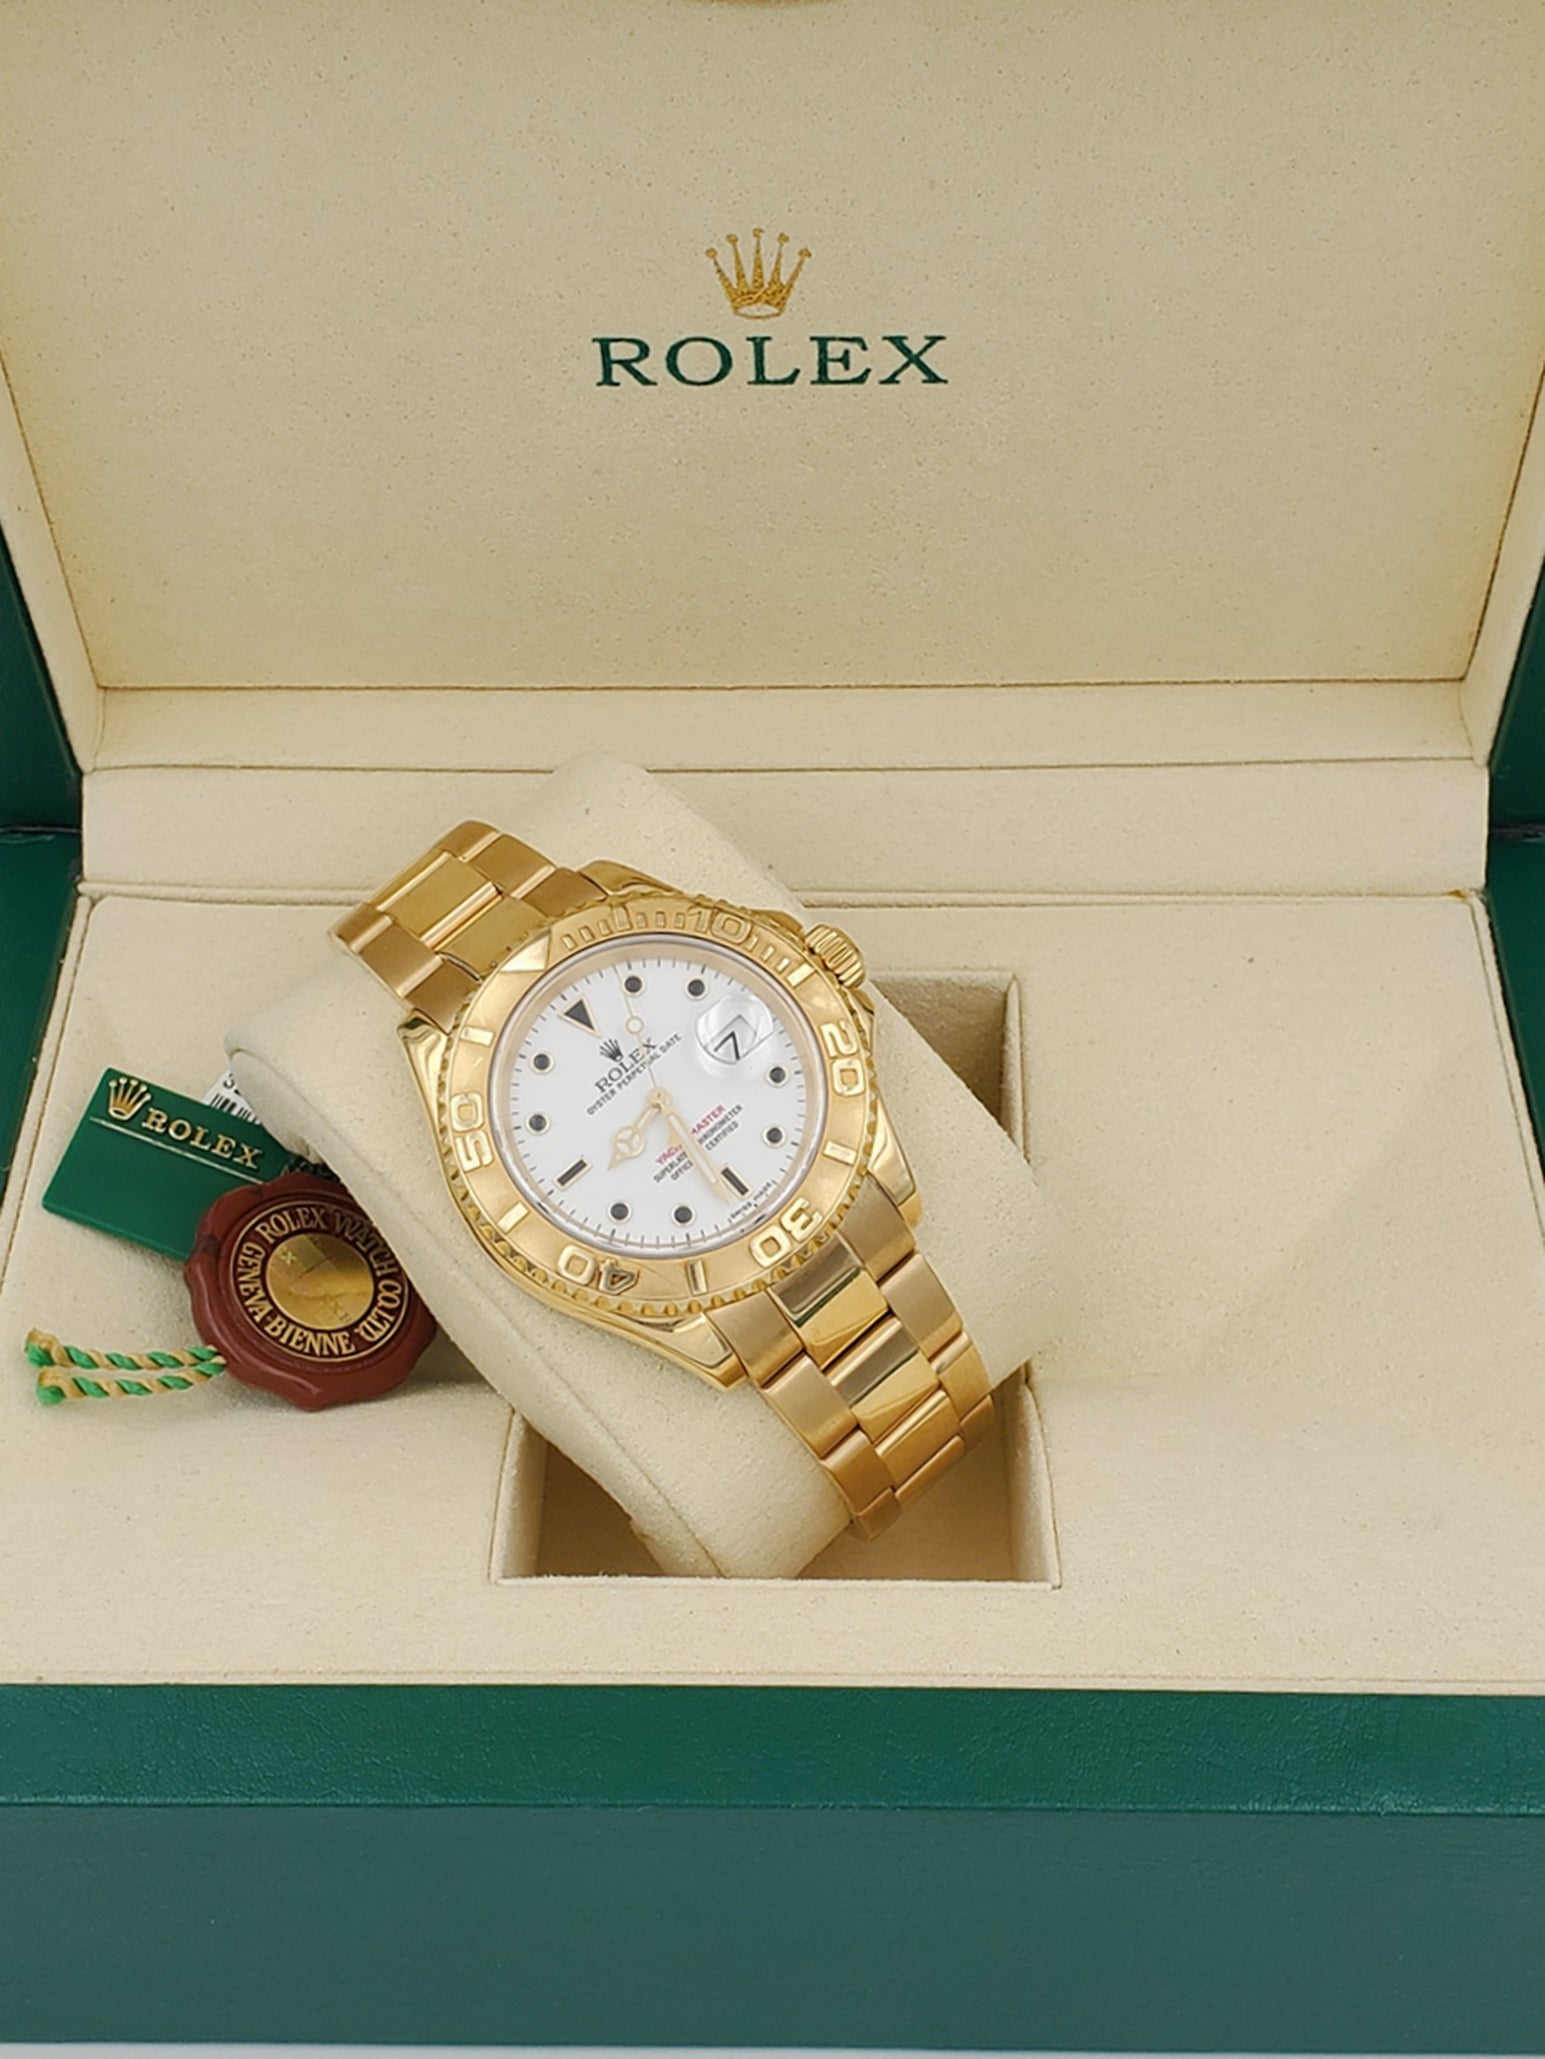 Men's Rolex Yacht Master 40mm Oyster Perpetual 18K Solid Yellow Gold Watch with White Dial. (Pre-Owned 16628)